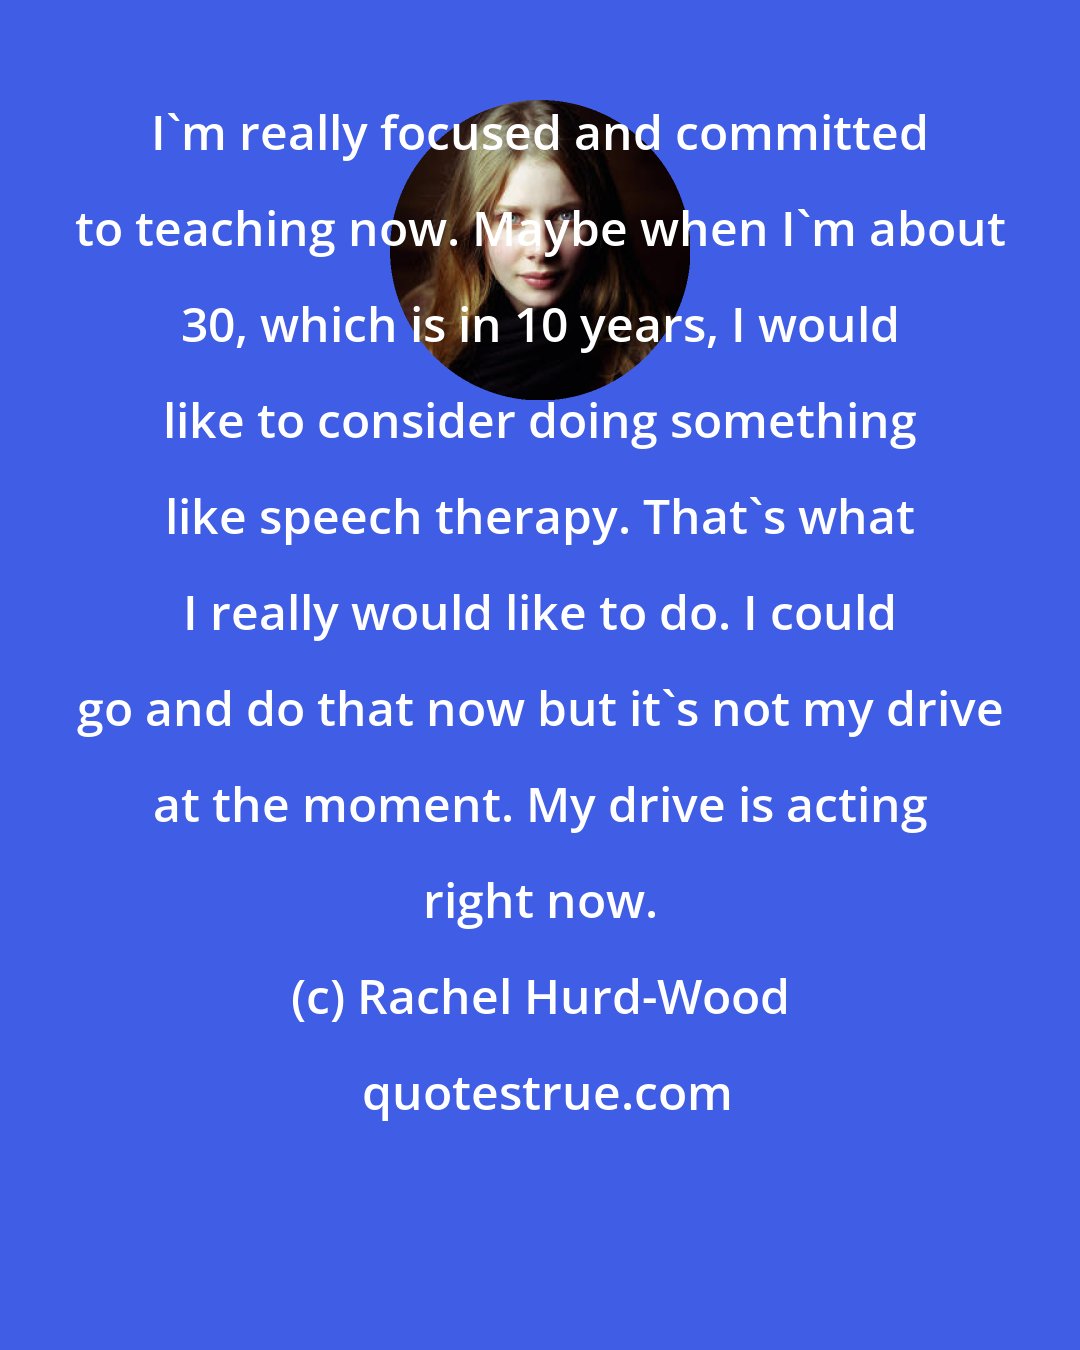 Rachel Hurd-Wood: I'm really focused and committed to teaching now. Maybe when I'm about 30, which is in 10 years, I would like to consider doing something like speech therapy. That's what I really would like to do. I could go and do that now but it's not my drive at the moment. My drive is acting right now.